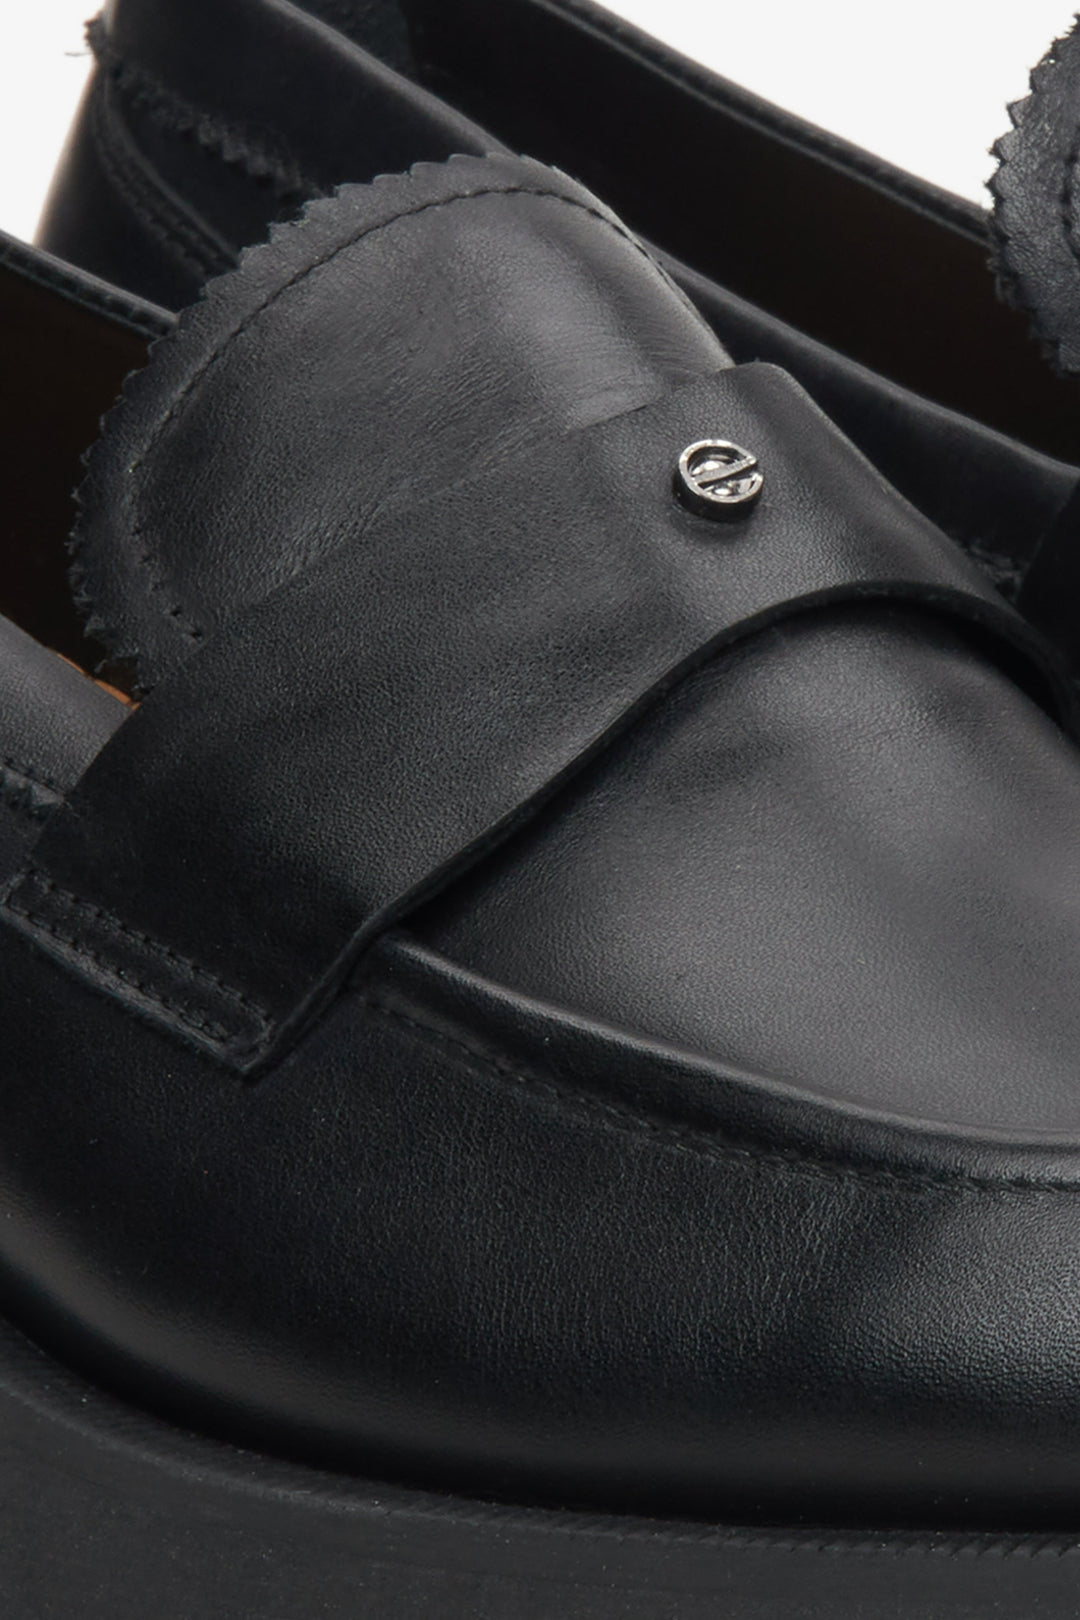 Estro women's loafers in black, made of genuine leather - close up on details.